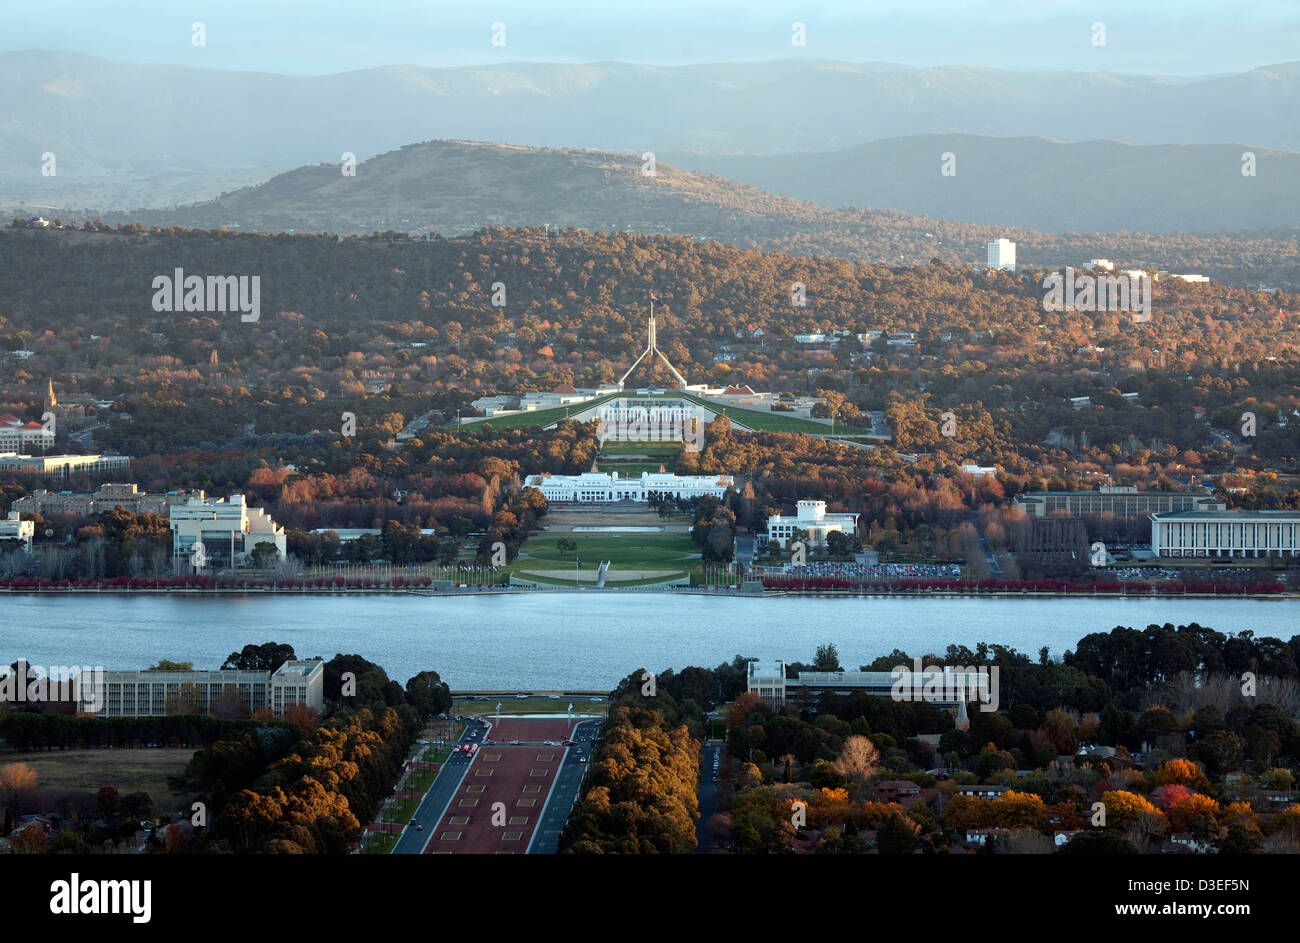 Elevated aerial view looking across Lake Burley Griffin to the Australian Houses of Parliament on an autumn day. Stock Photo